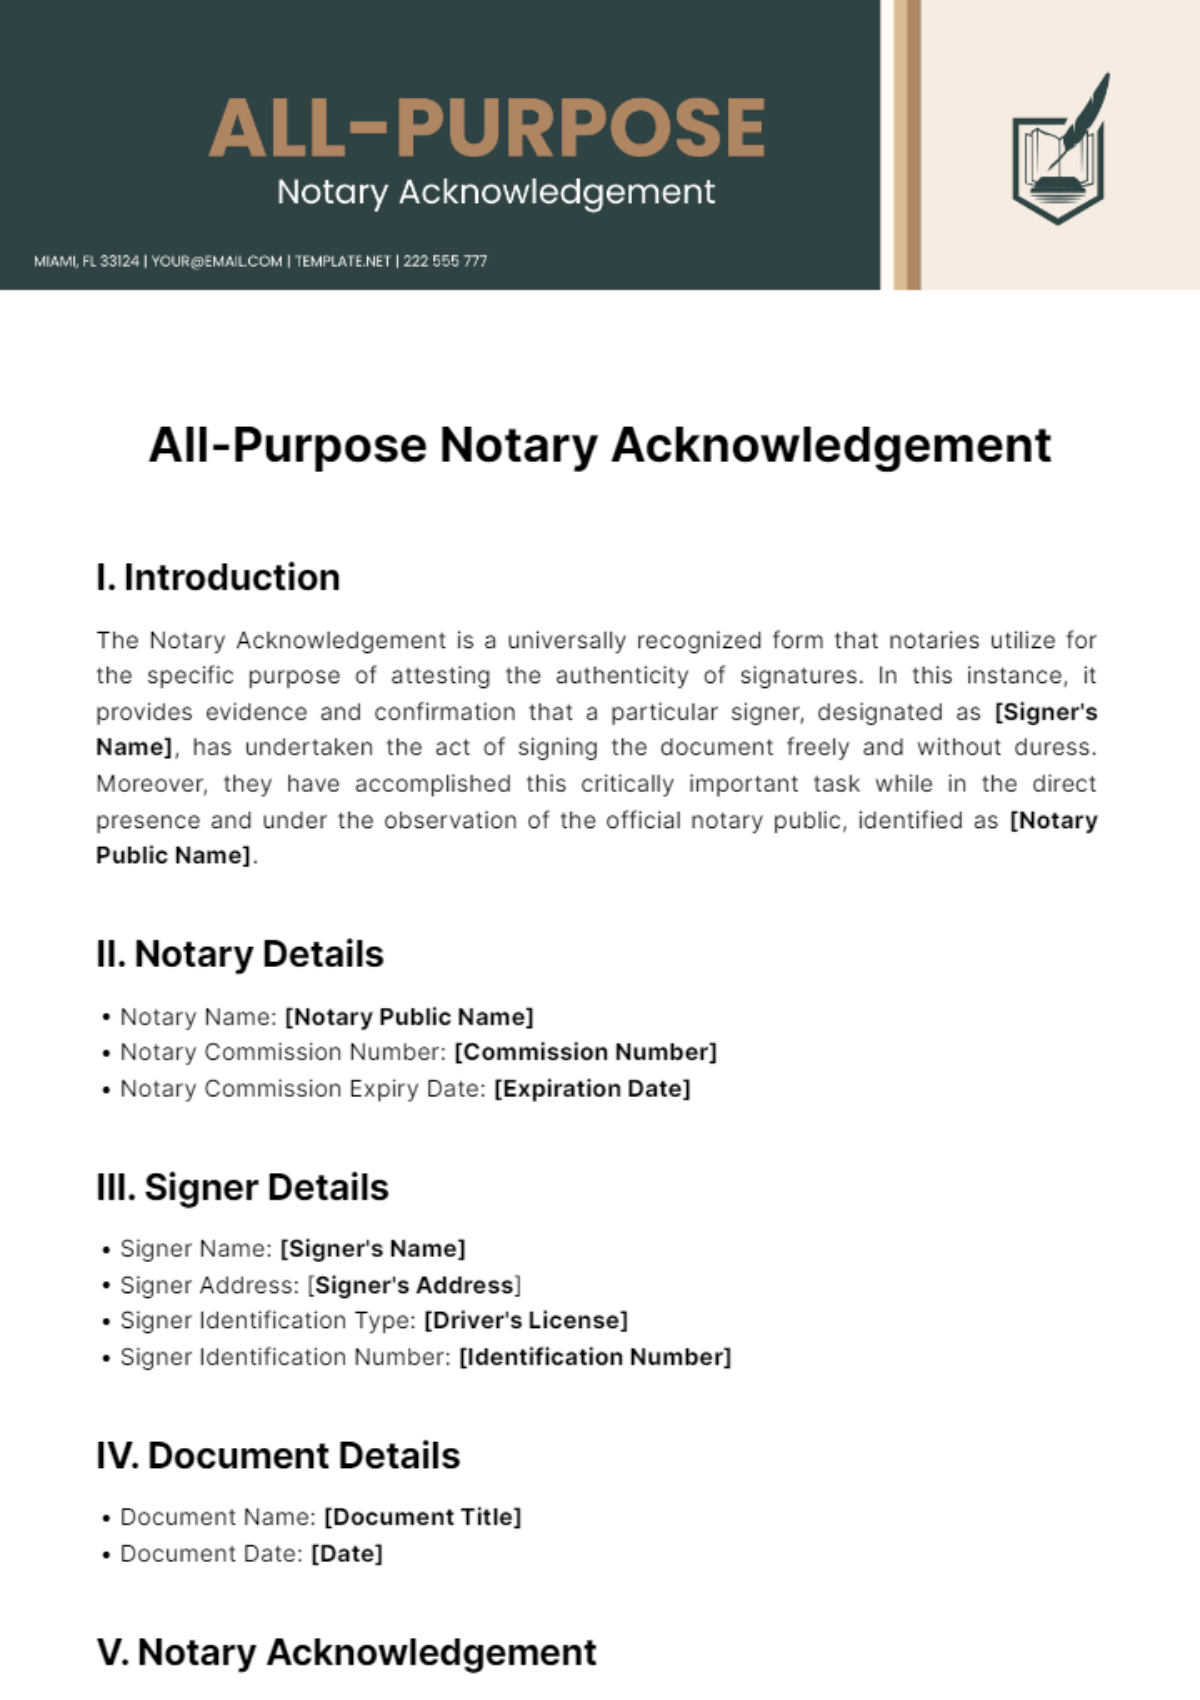 Free All-Purpose Notary Acknowledgement Template